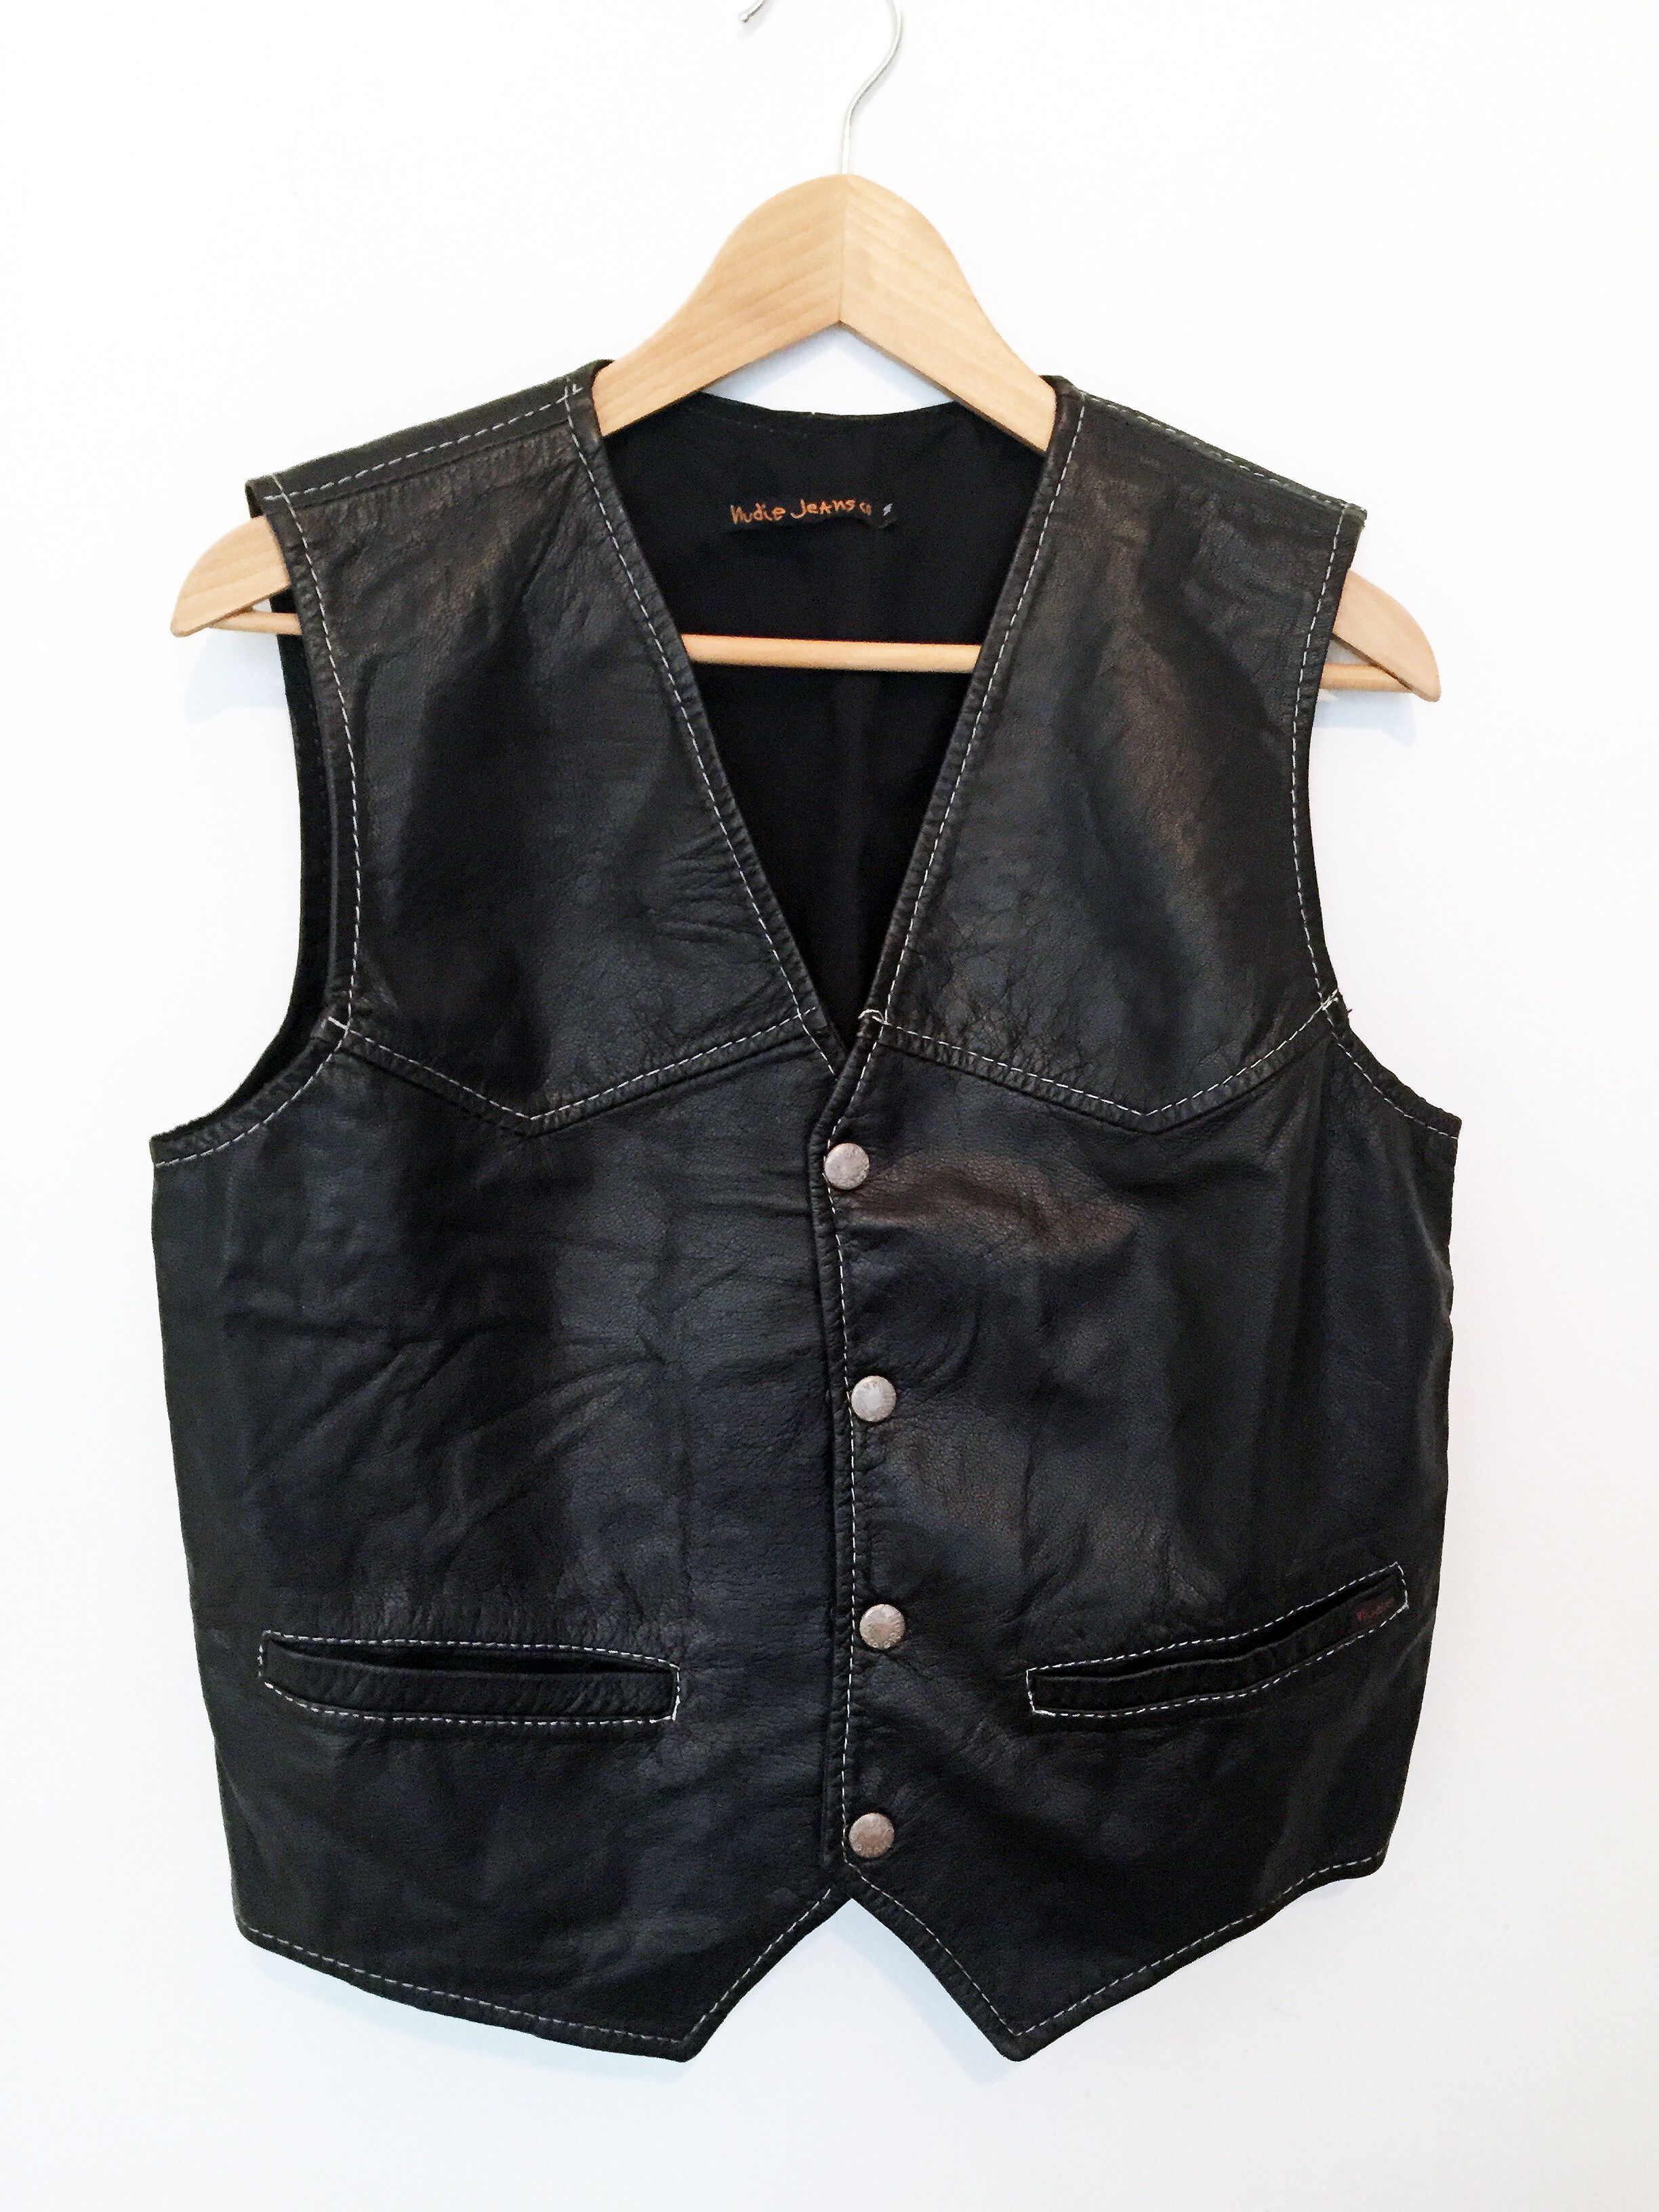 Nudie Jeans Leather Vest Made in Italy | Grailed